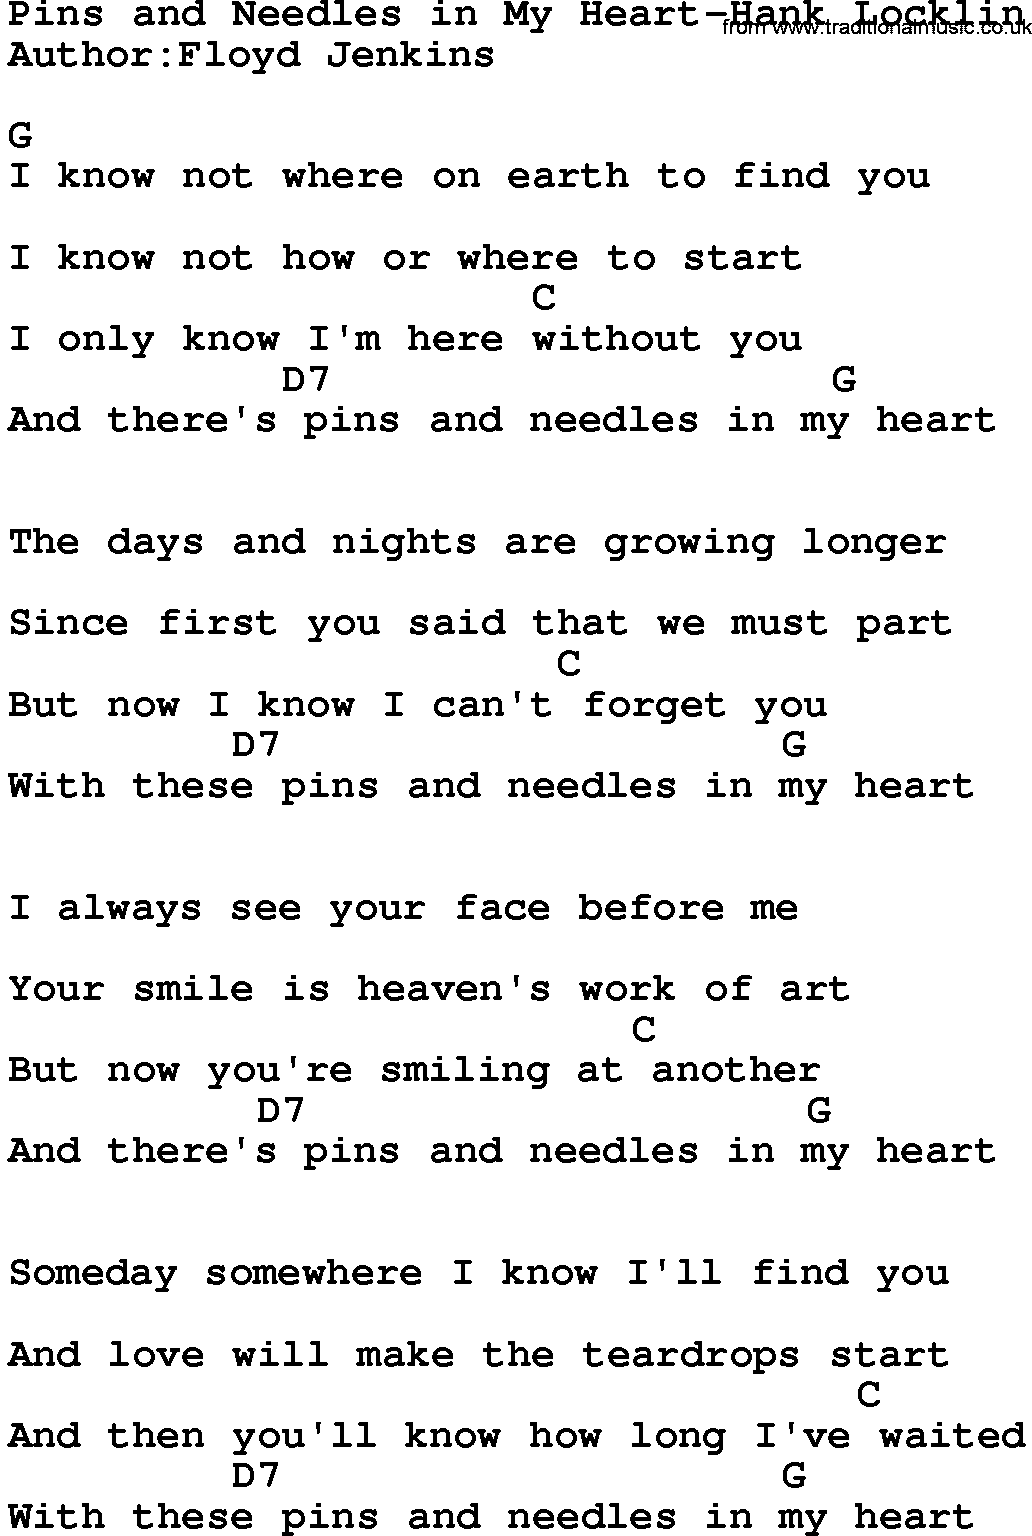 Country music song: Pins And Needles In My Heart-Hank Locklin lyrics and chords